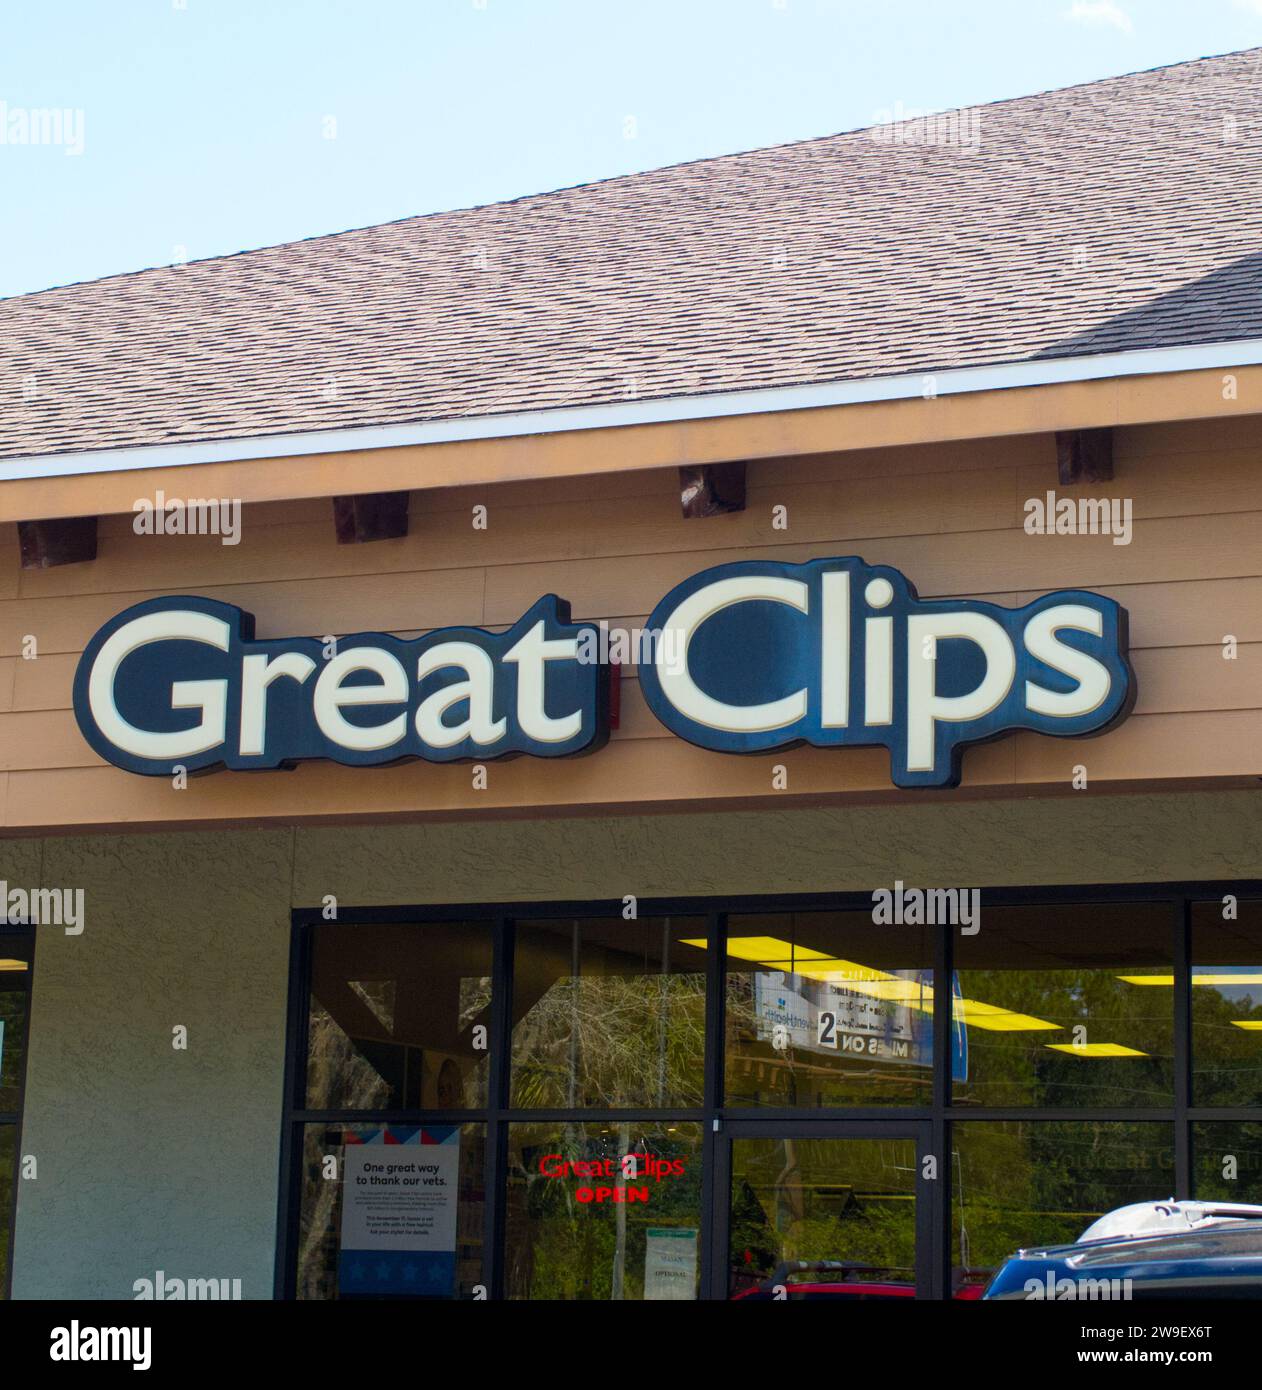 Great Clips hair salon Exterior facade sign signage above entrance in strip mall haircut location. They provide haircuts to men, women and kids. Blue Stock Photo